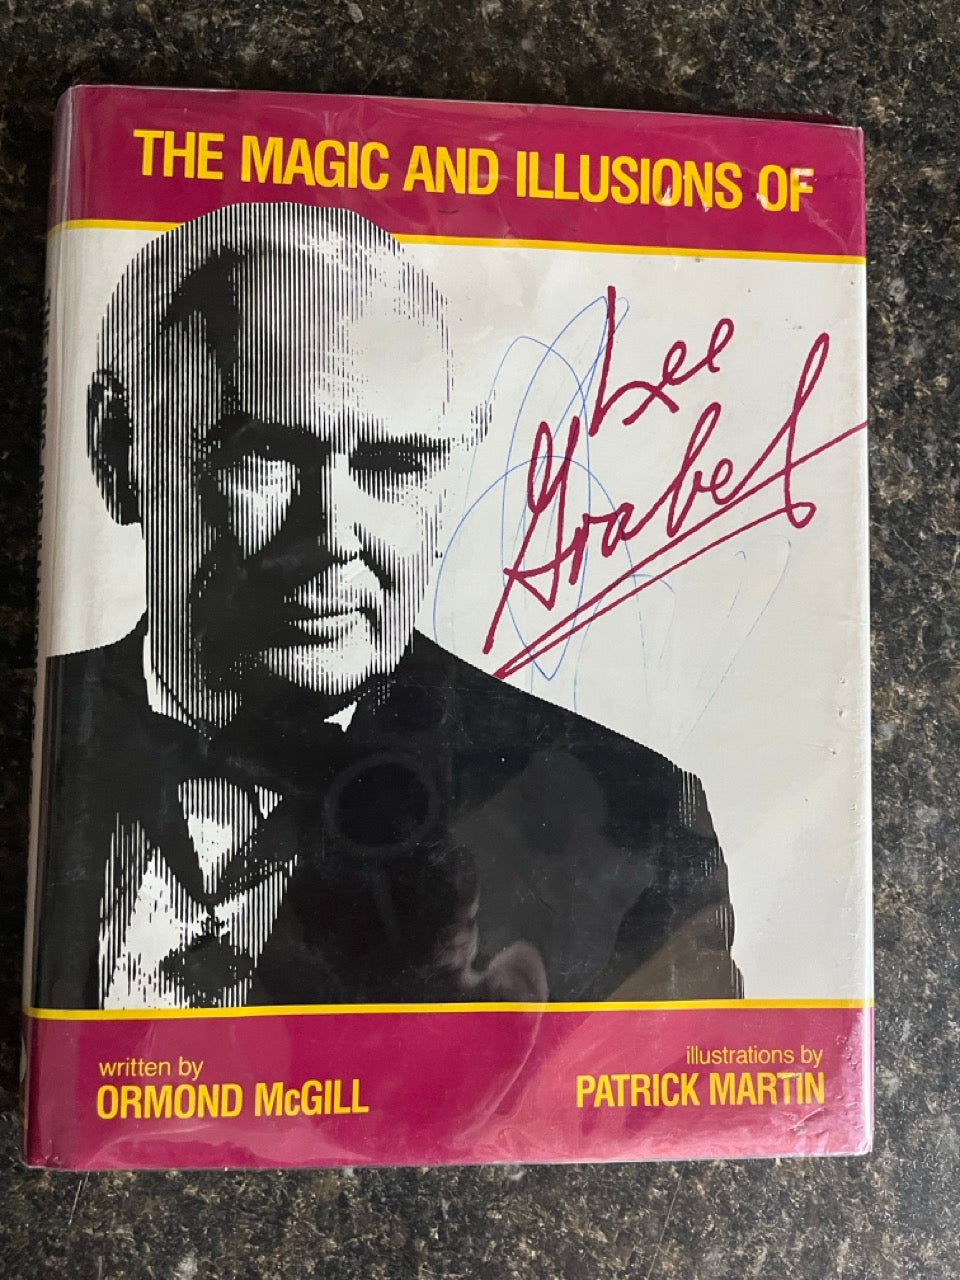 The Magic And Illusions of Lee Grabel - Ormond McGill